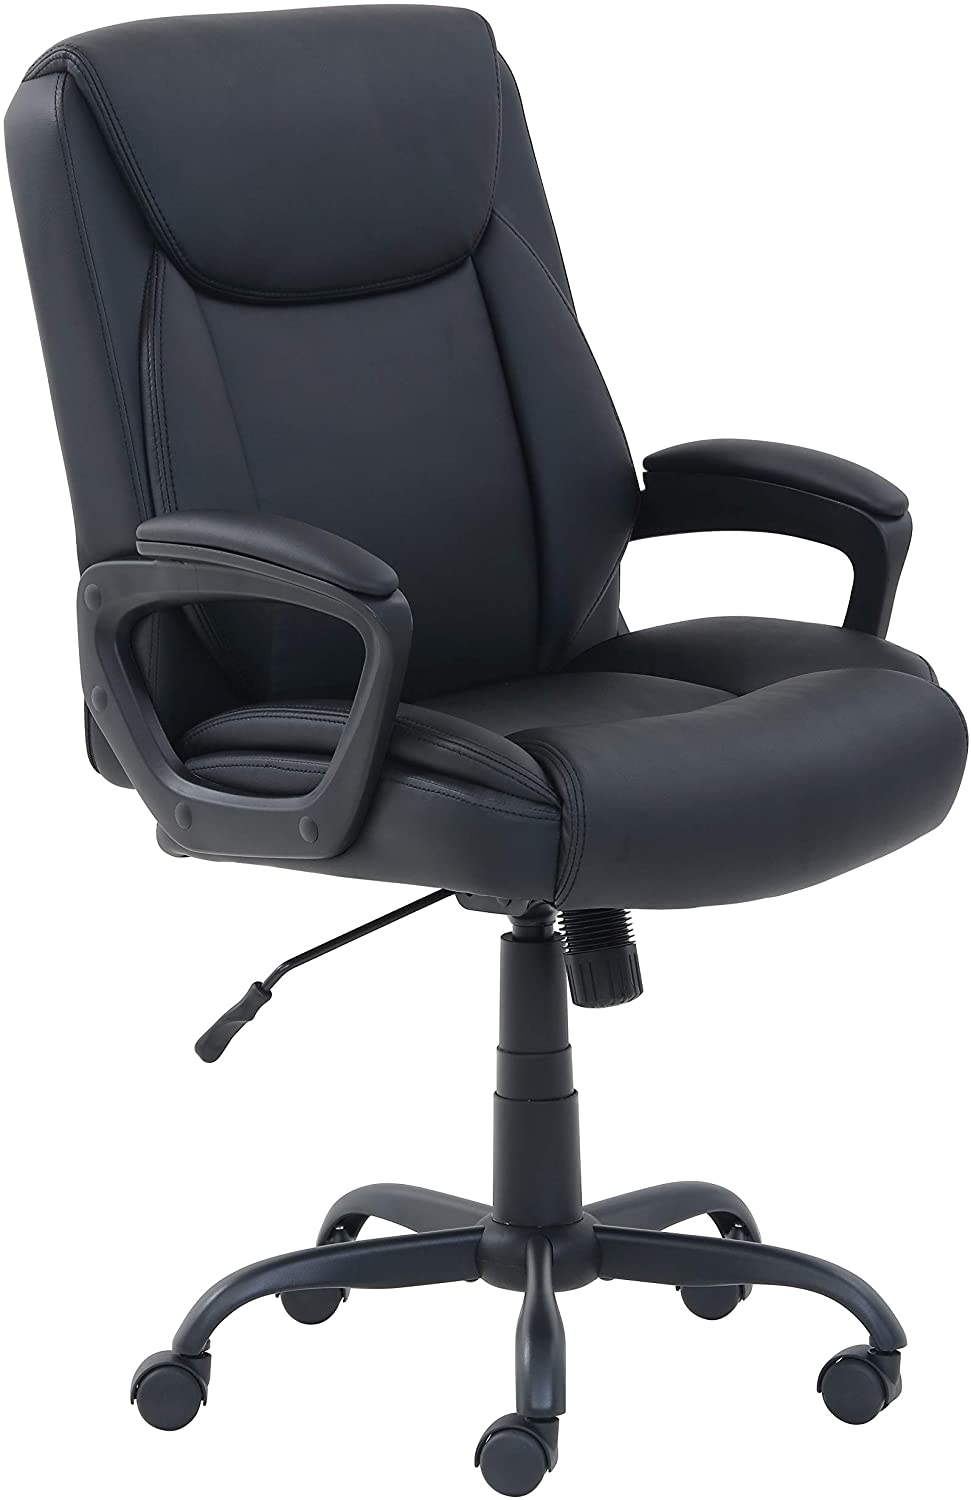 AmazonBasics Classic Puresoft PU-Padded Mid-Back Office Computer Desk Chair with Armrest - Black